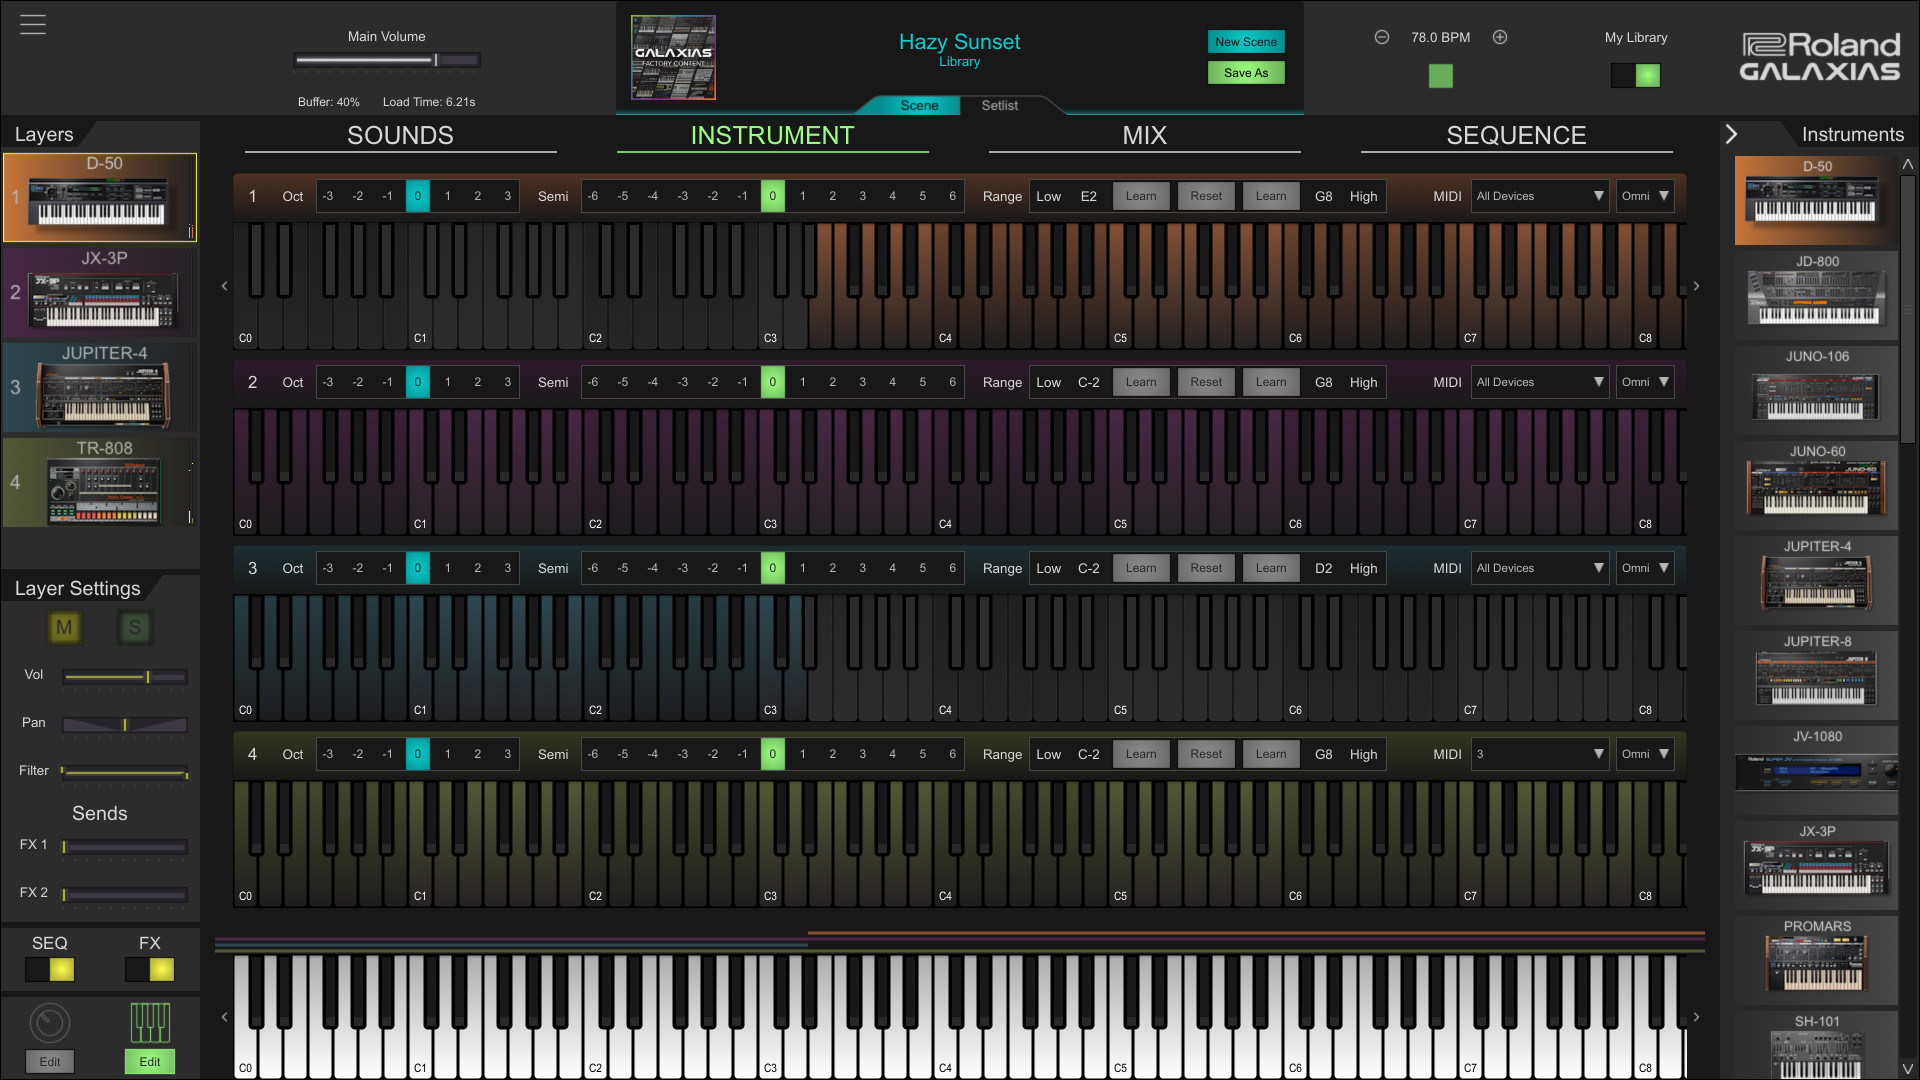 Roland's new software instrument Galaxias offers access to 20,000 sounds